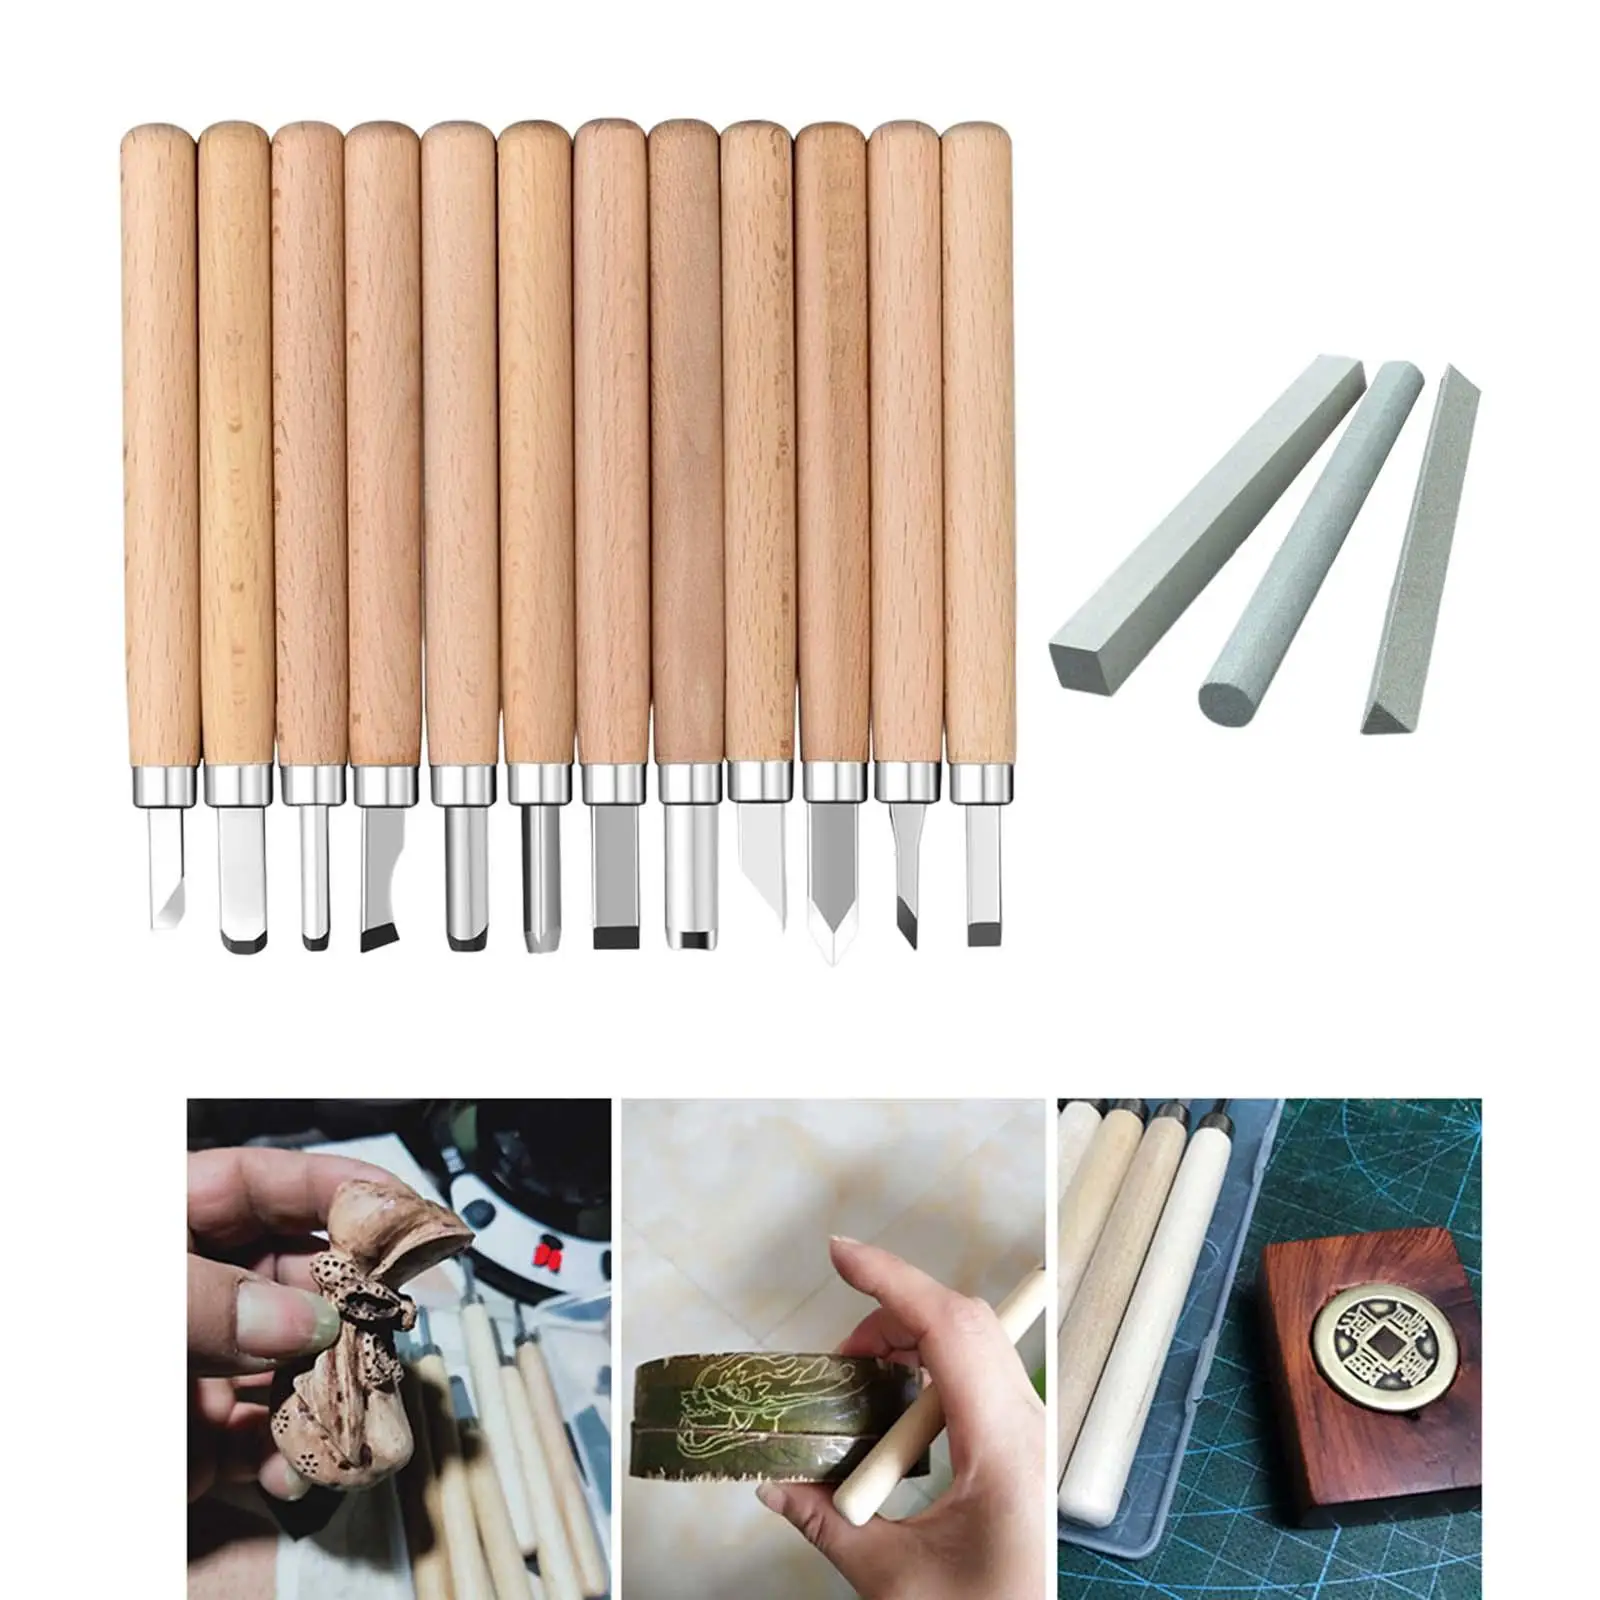 12Pcs Wood Carving Chisel Set Woodworking Wood Handle Tools Carver Set for Beginners Cutting Wood Blocks Project Softwoods